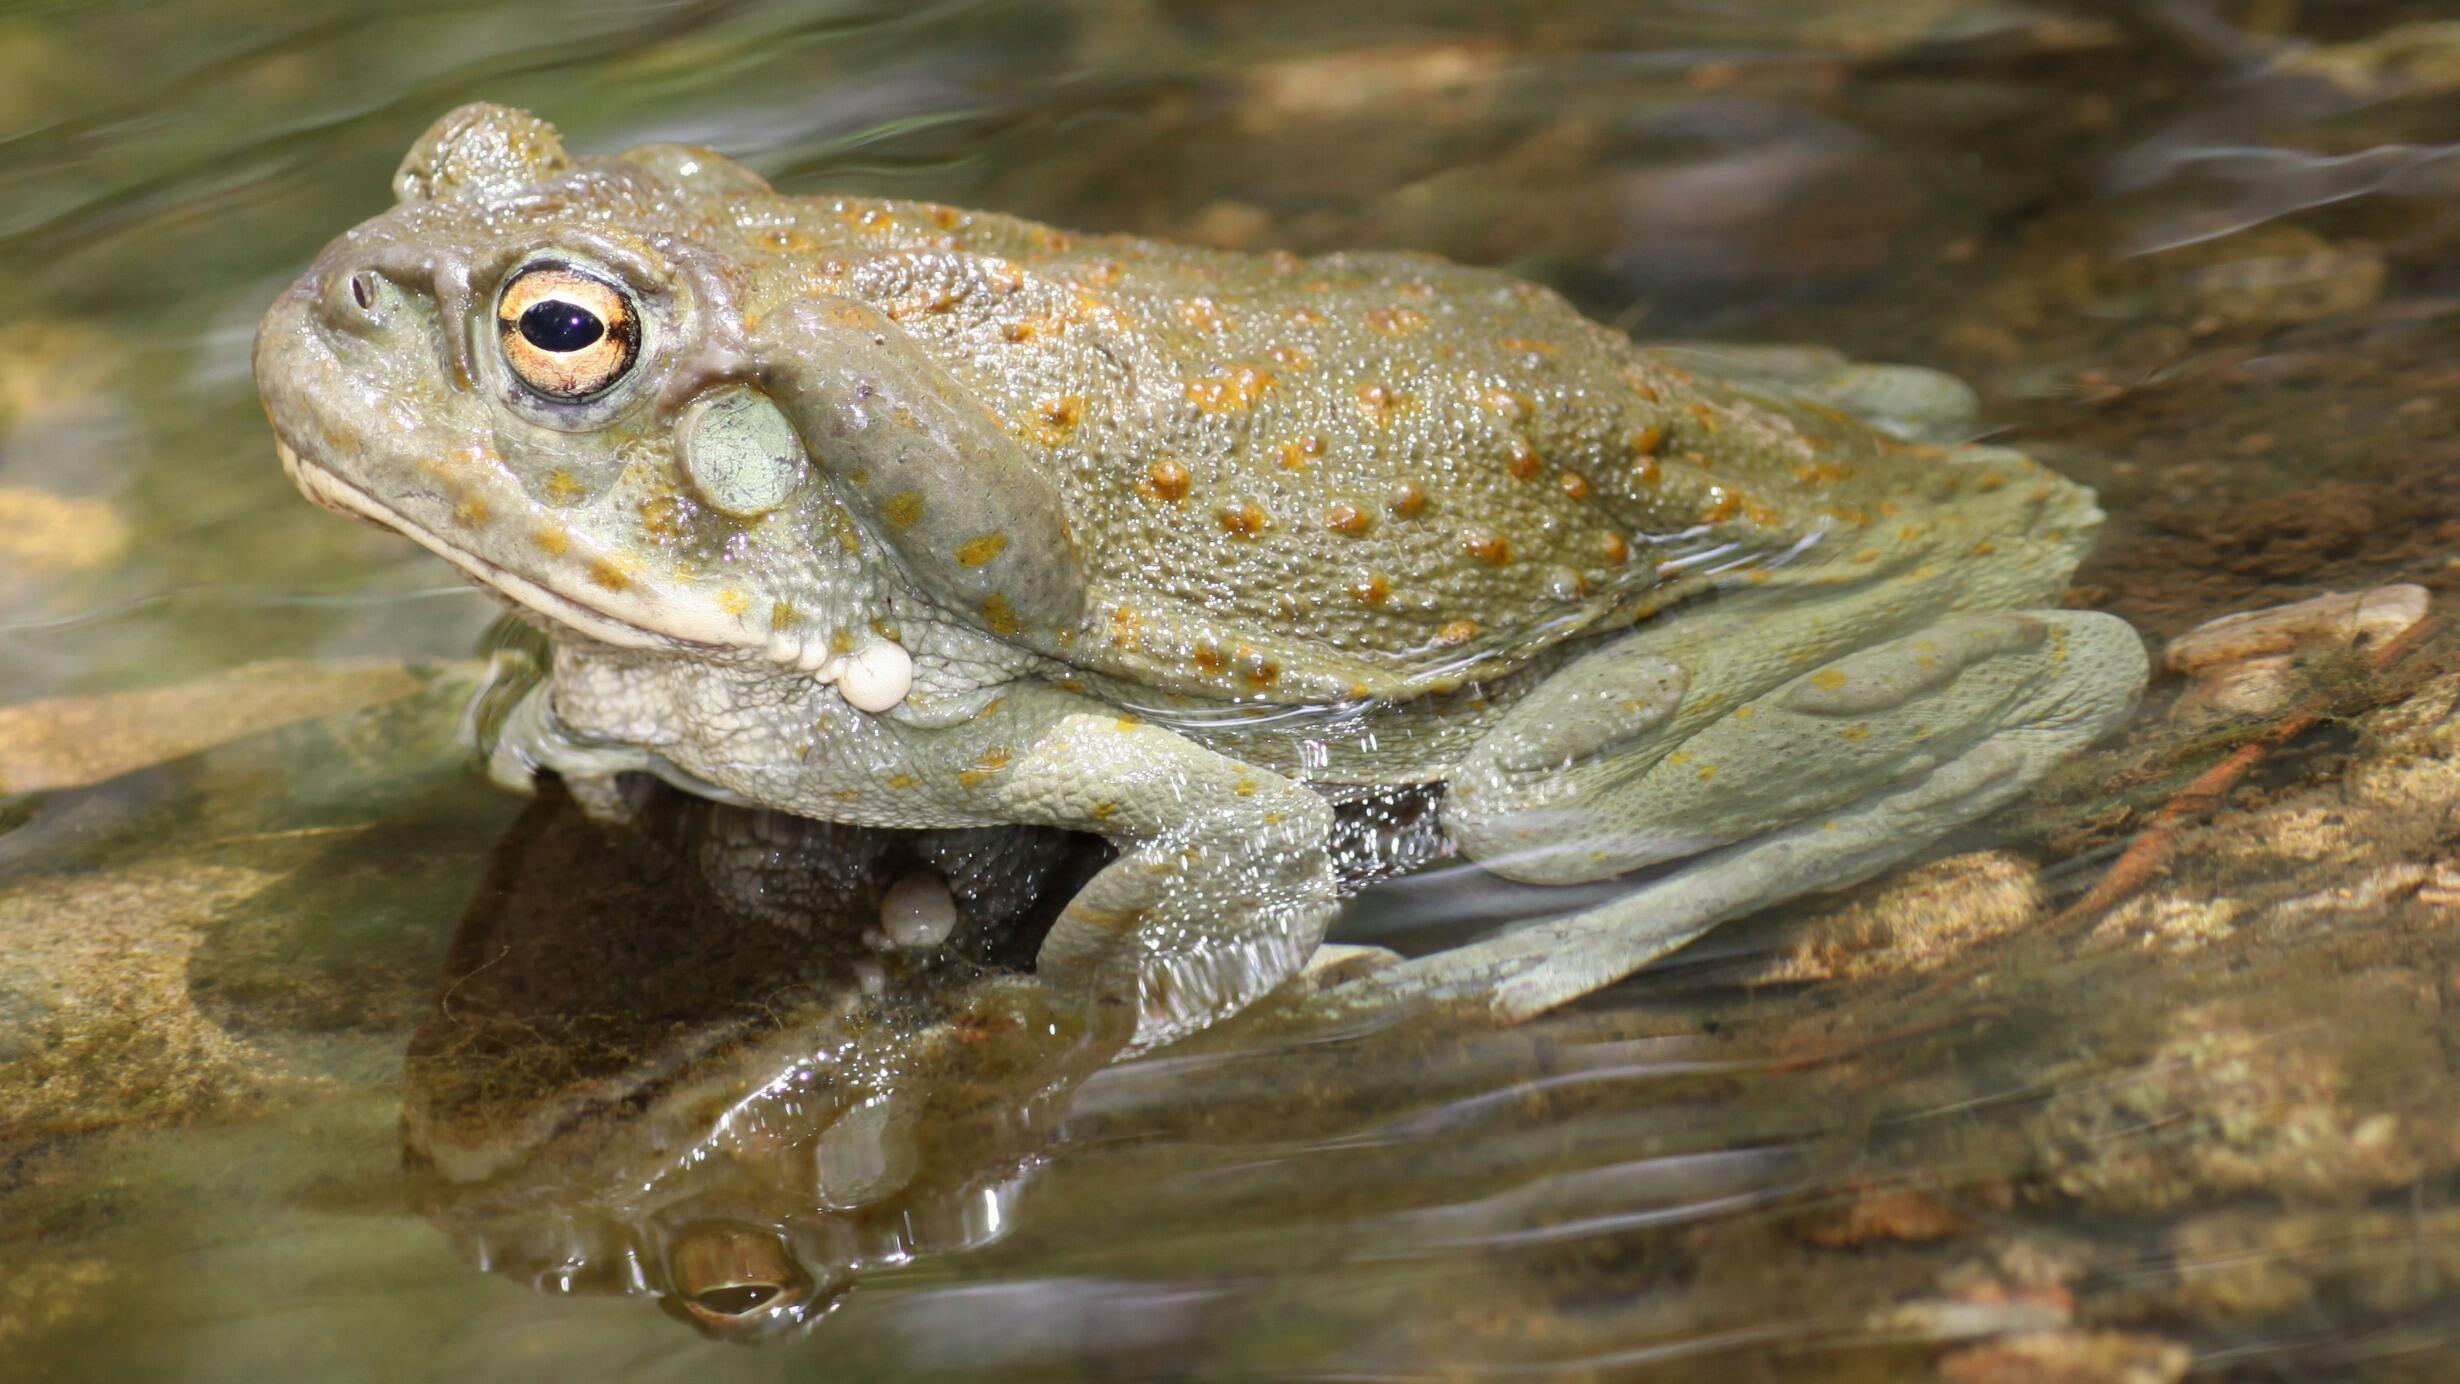 Close-up side view of gray green toad with raised orange spots sitting in shallow water